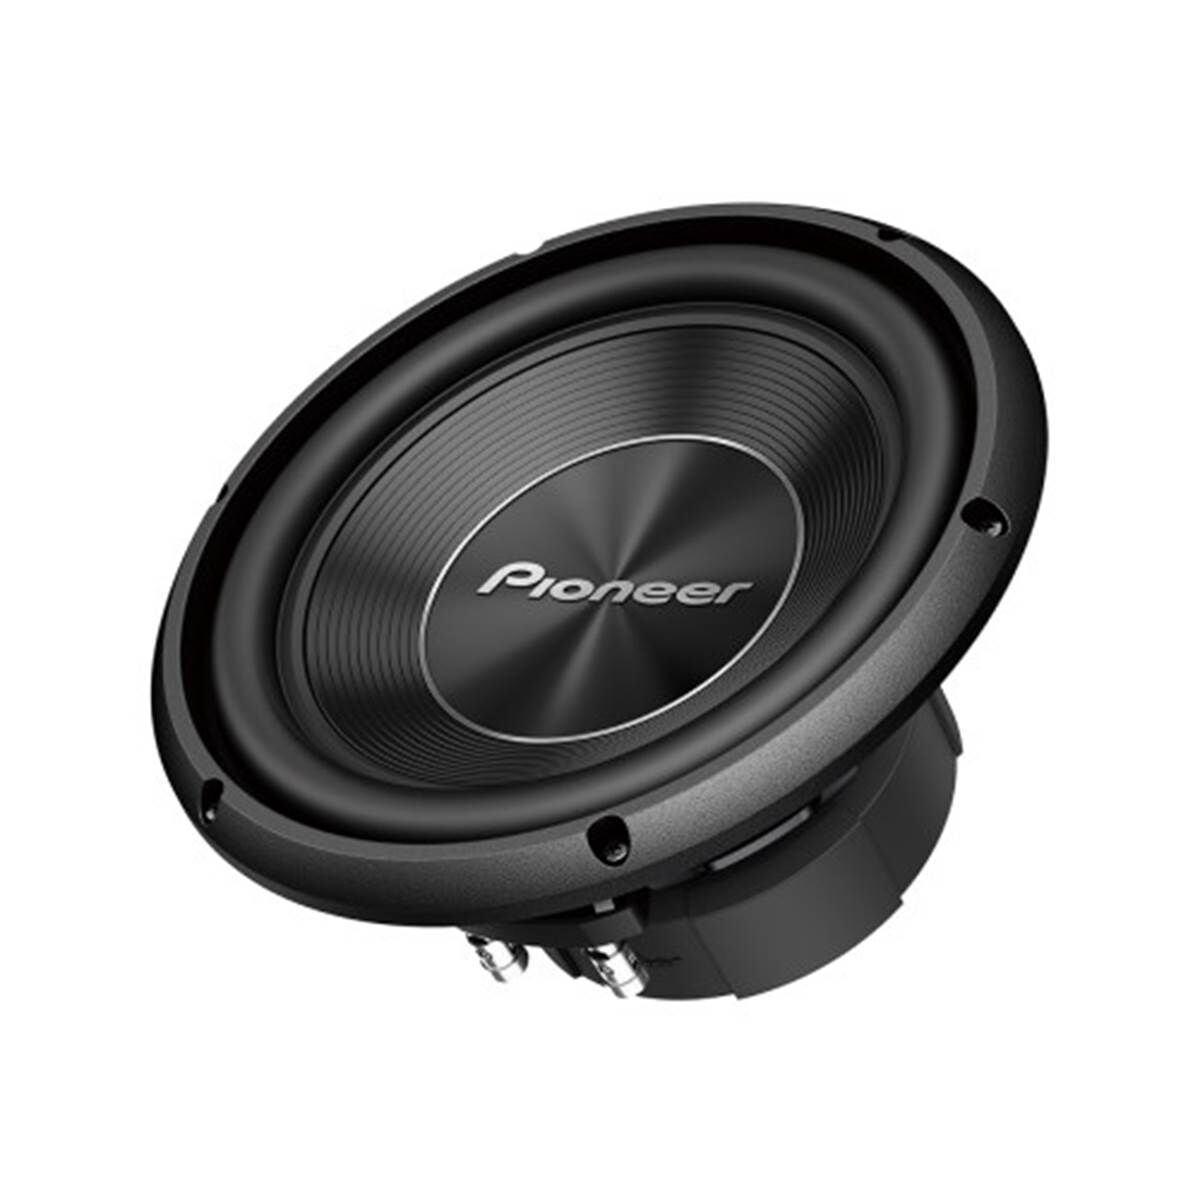 Pioneer Subwoofer para coche 30 cm 1500 w  ts-a300s4